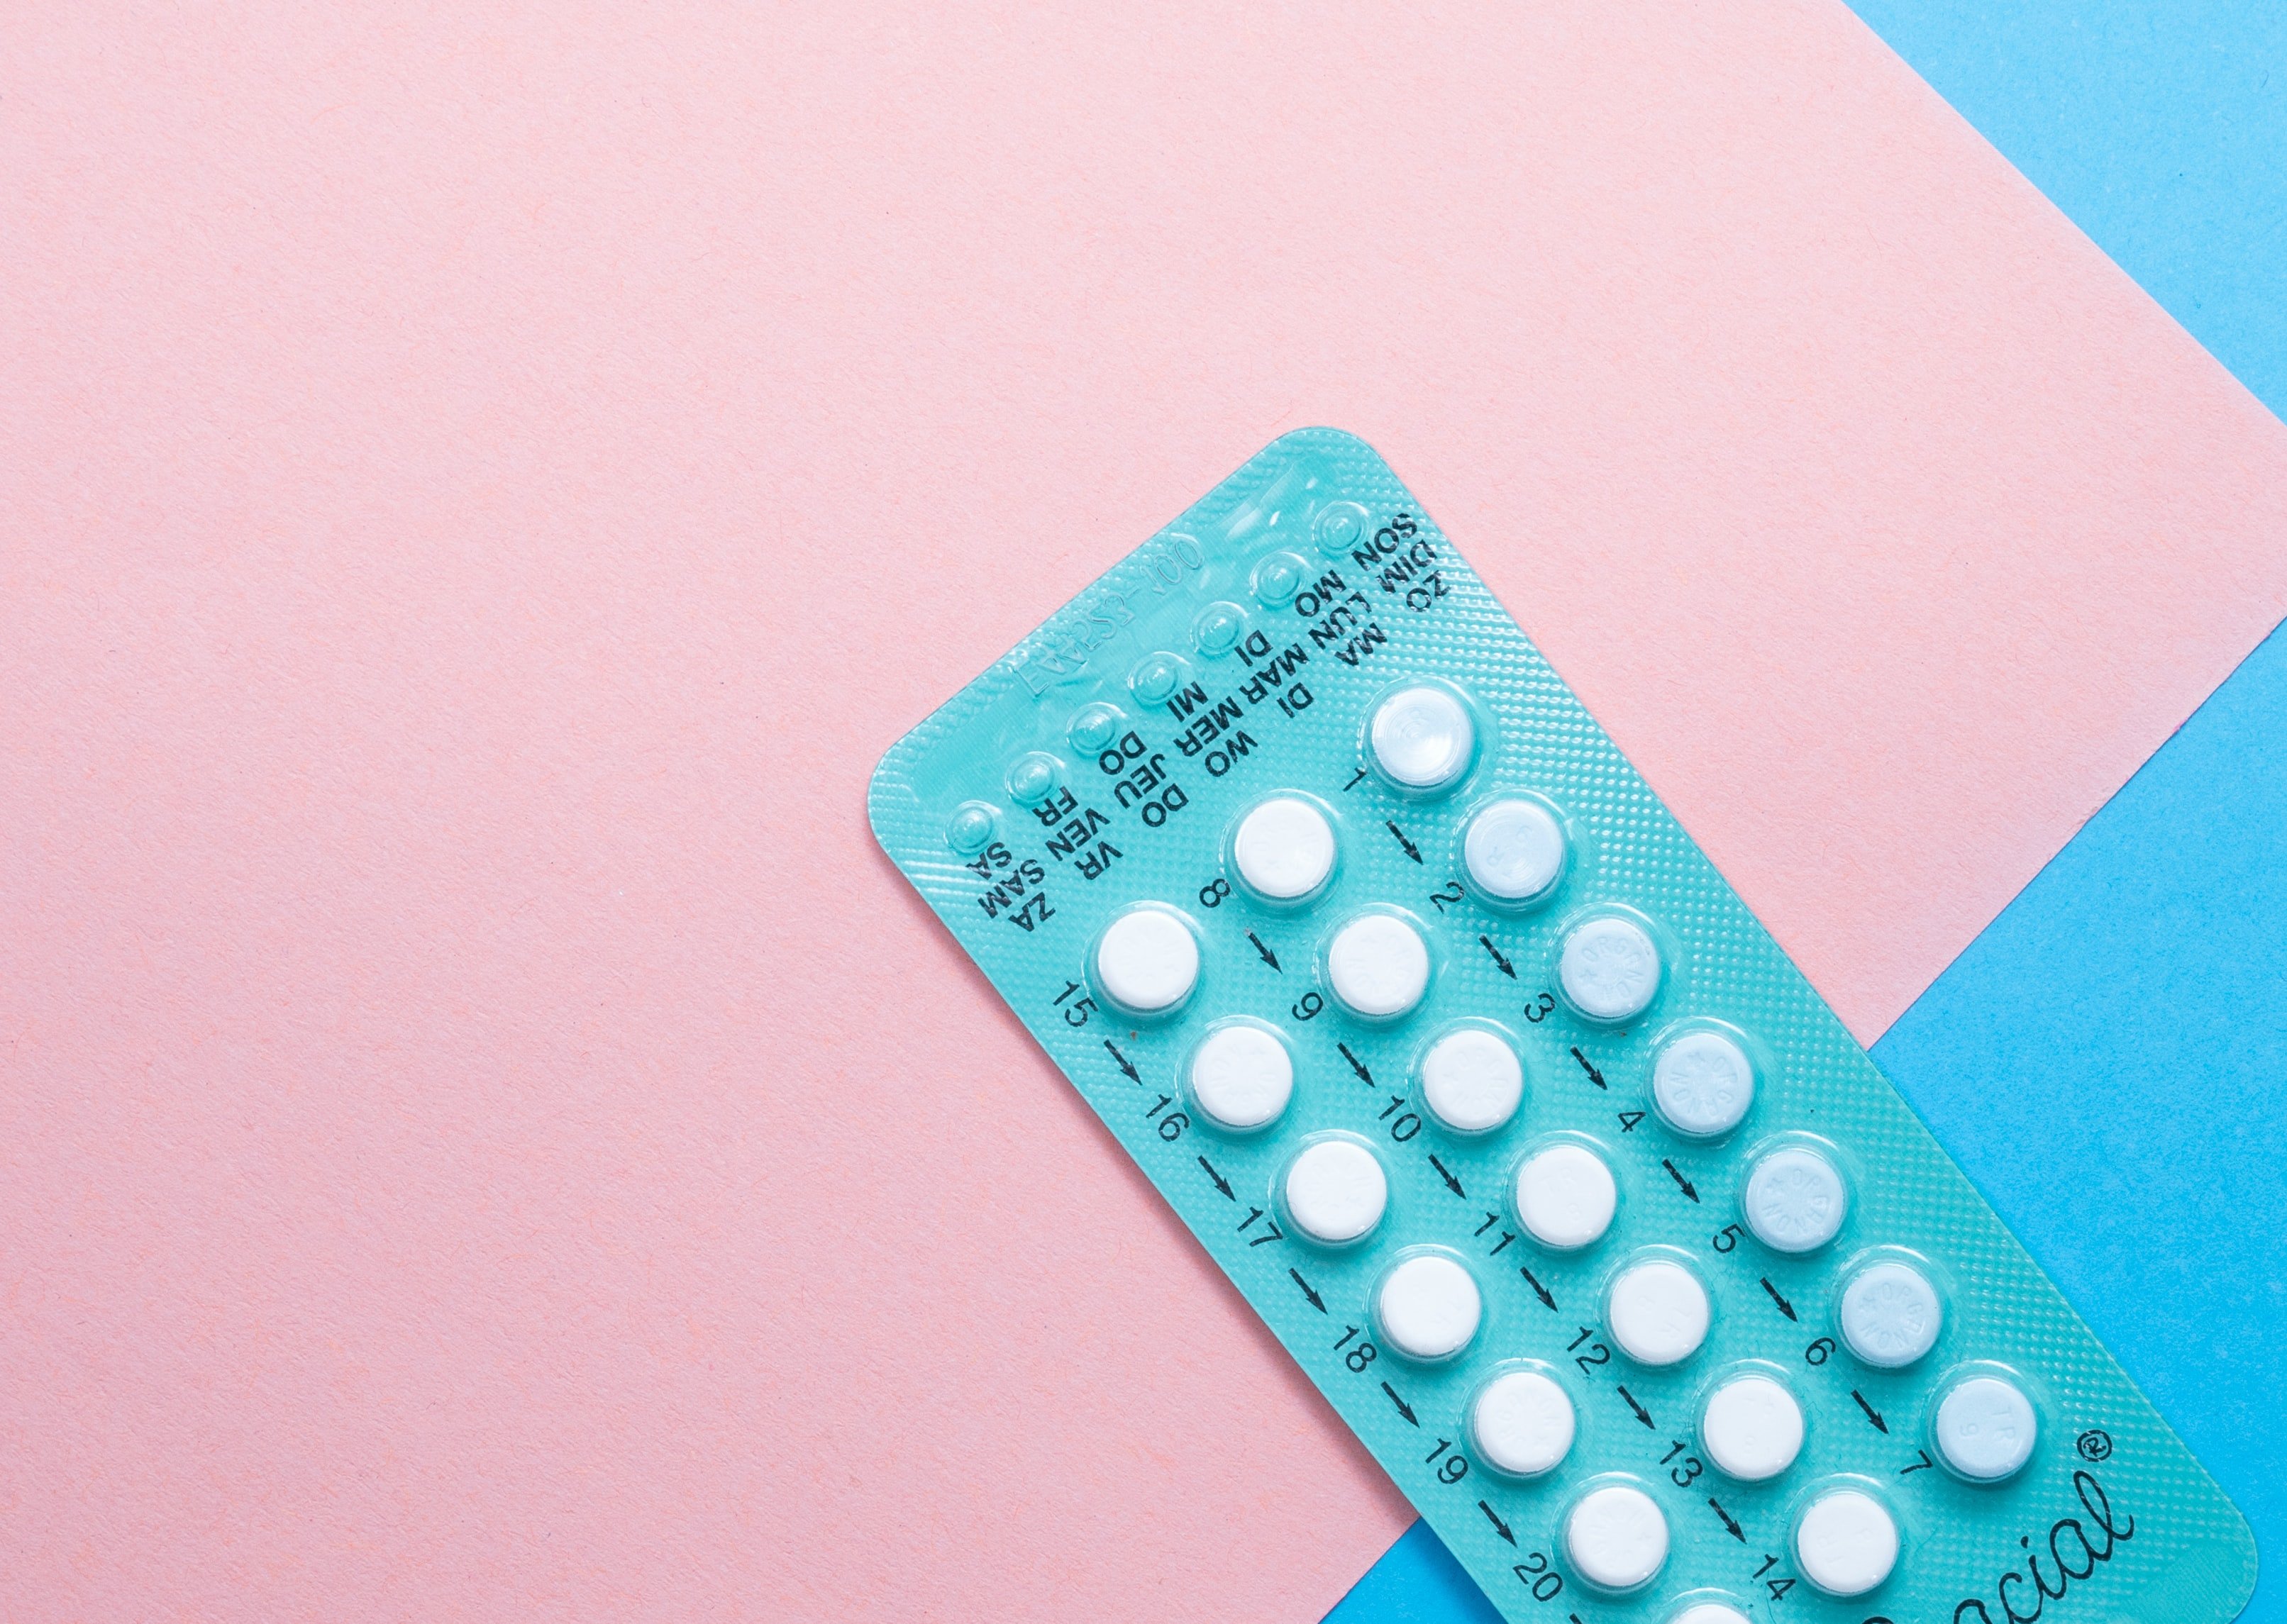 White medication pill blister pack | Source: Unsplash / Reproductive Health Supplies Coalition 